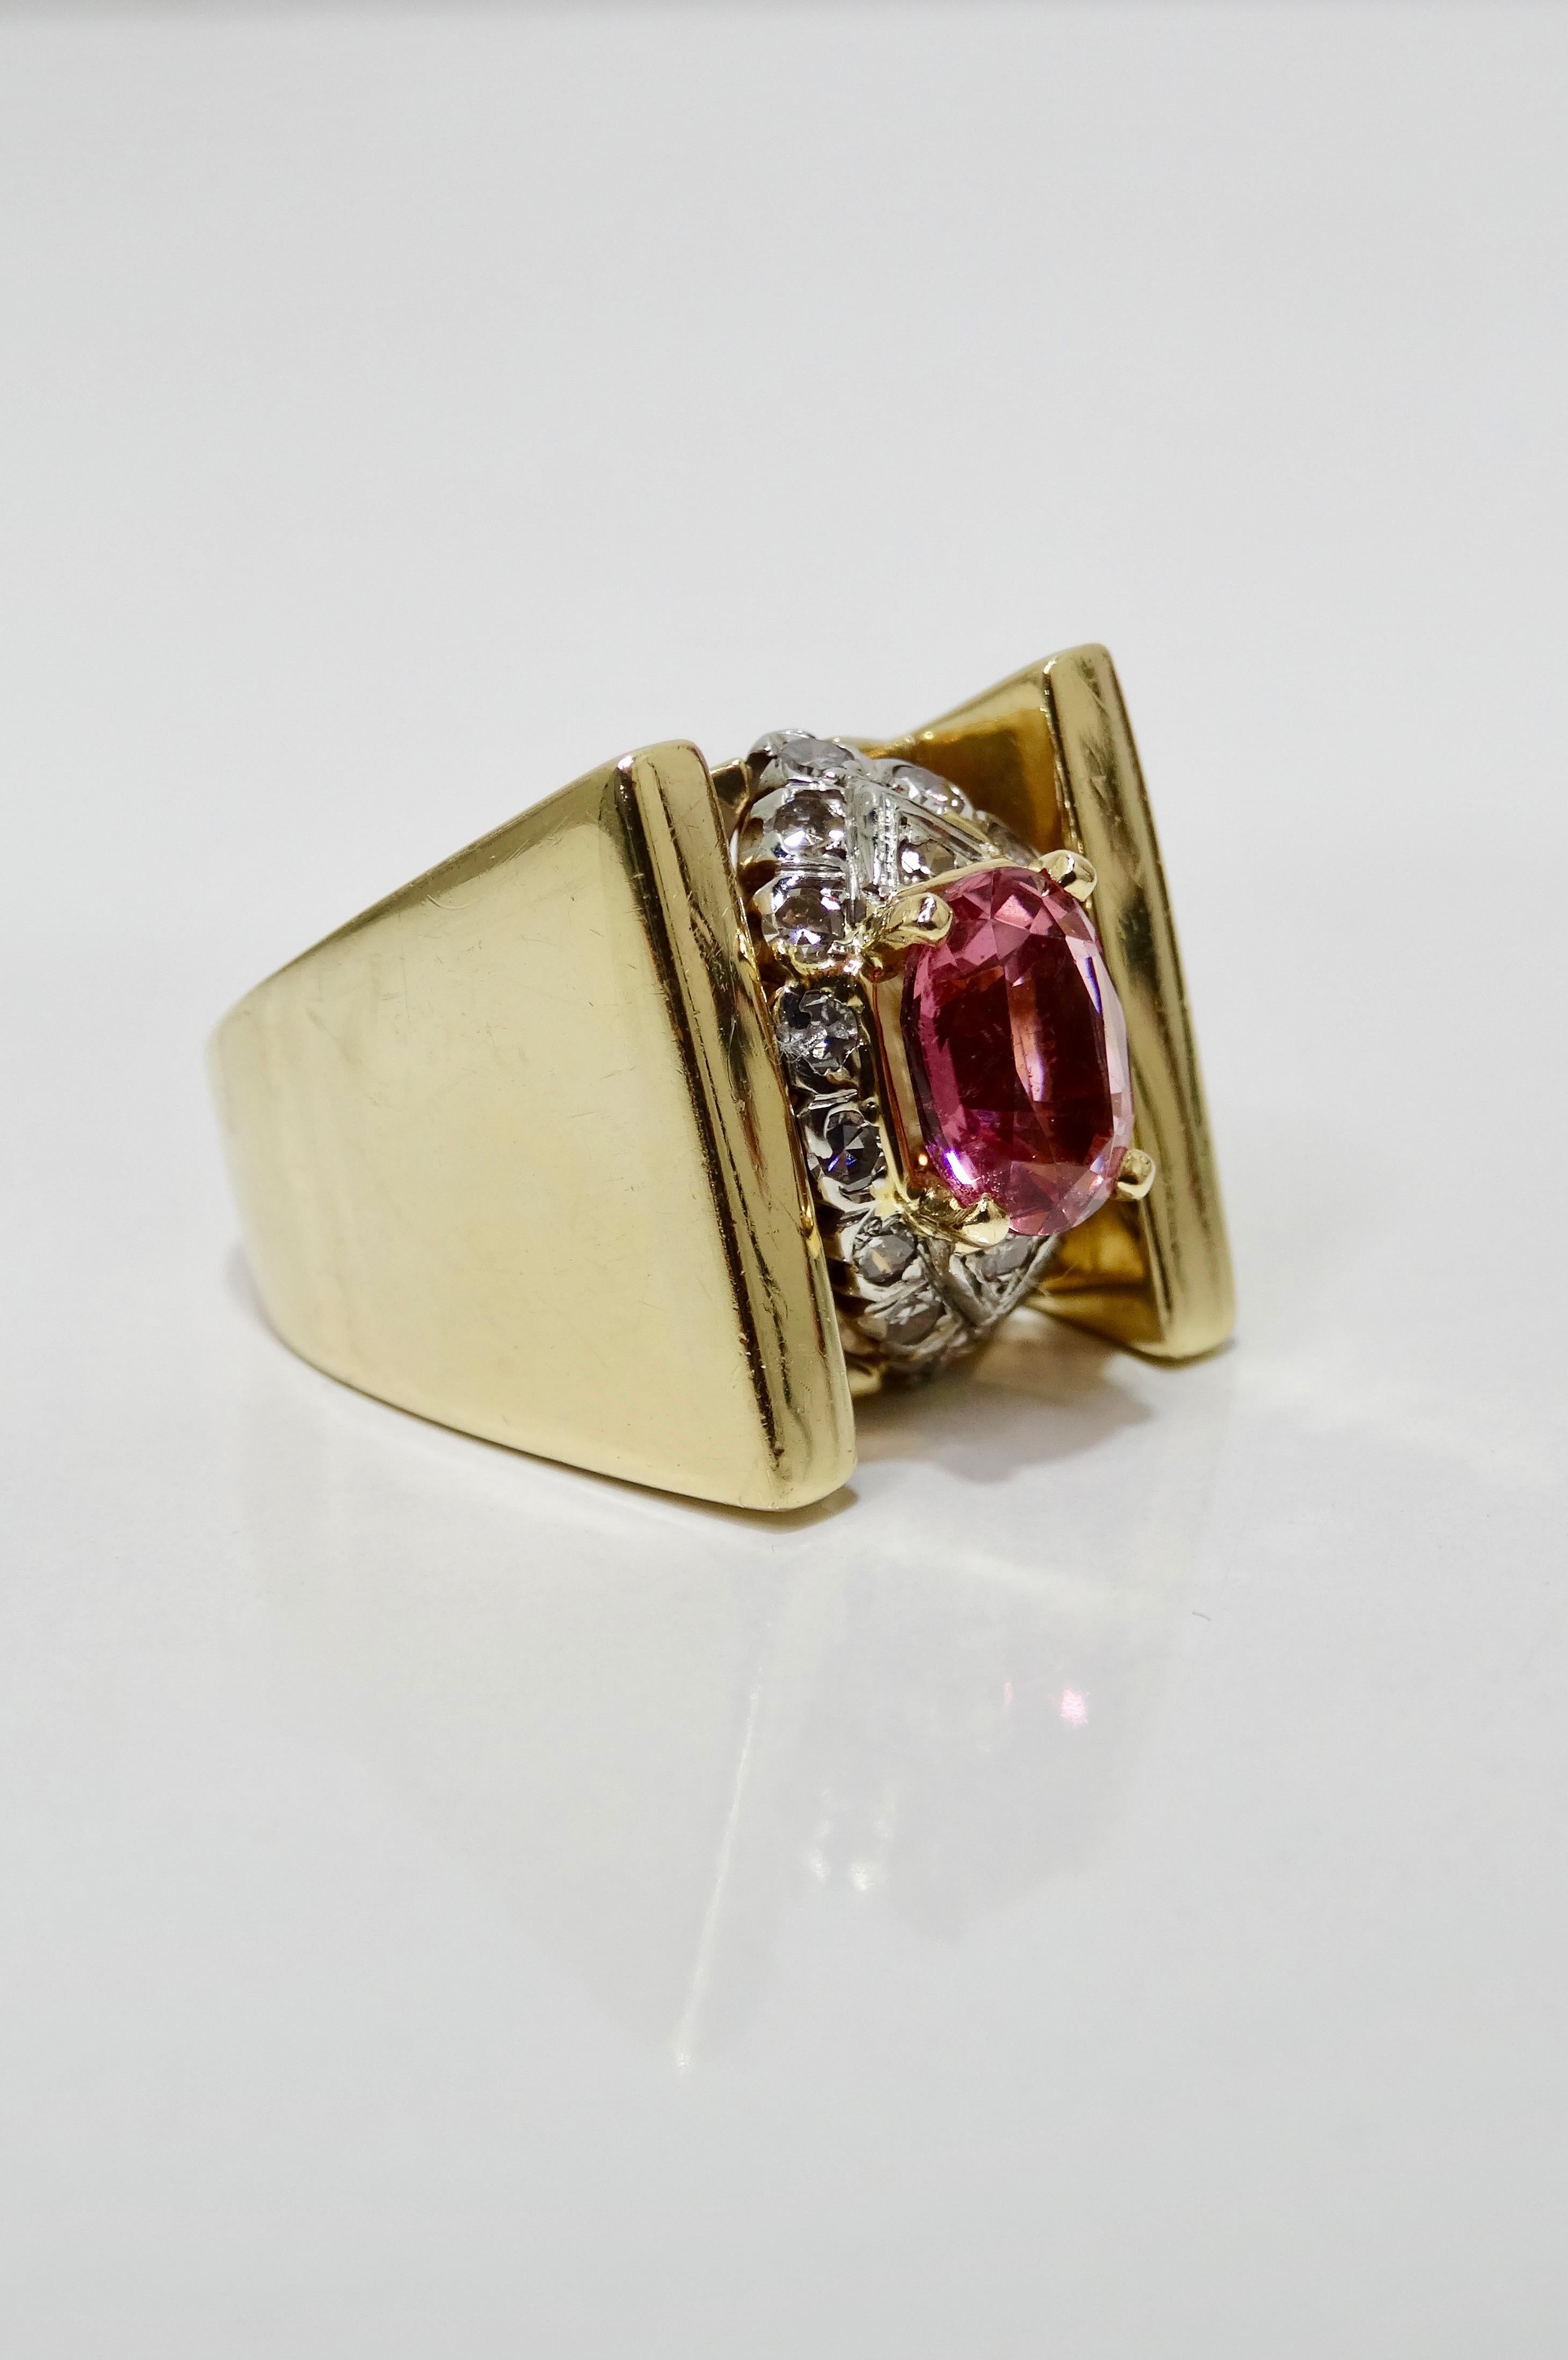 Elegant with a pop of color, this mid-20th century cluster ring is crafted from 14k Gold and features a thick tension band. Resting in the center prong setting is a stunning pink oval Tourmaline framed by a cluster of brilliant round cut diamonds.